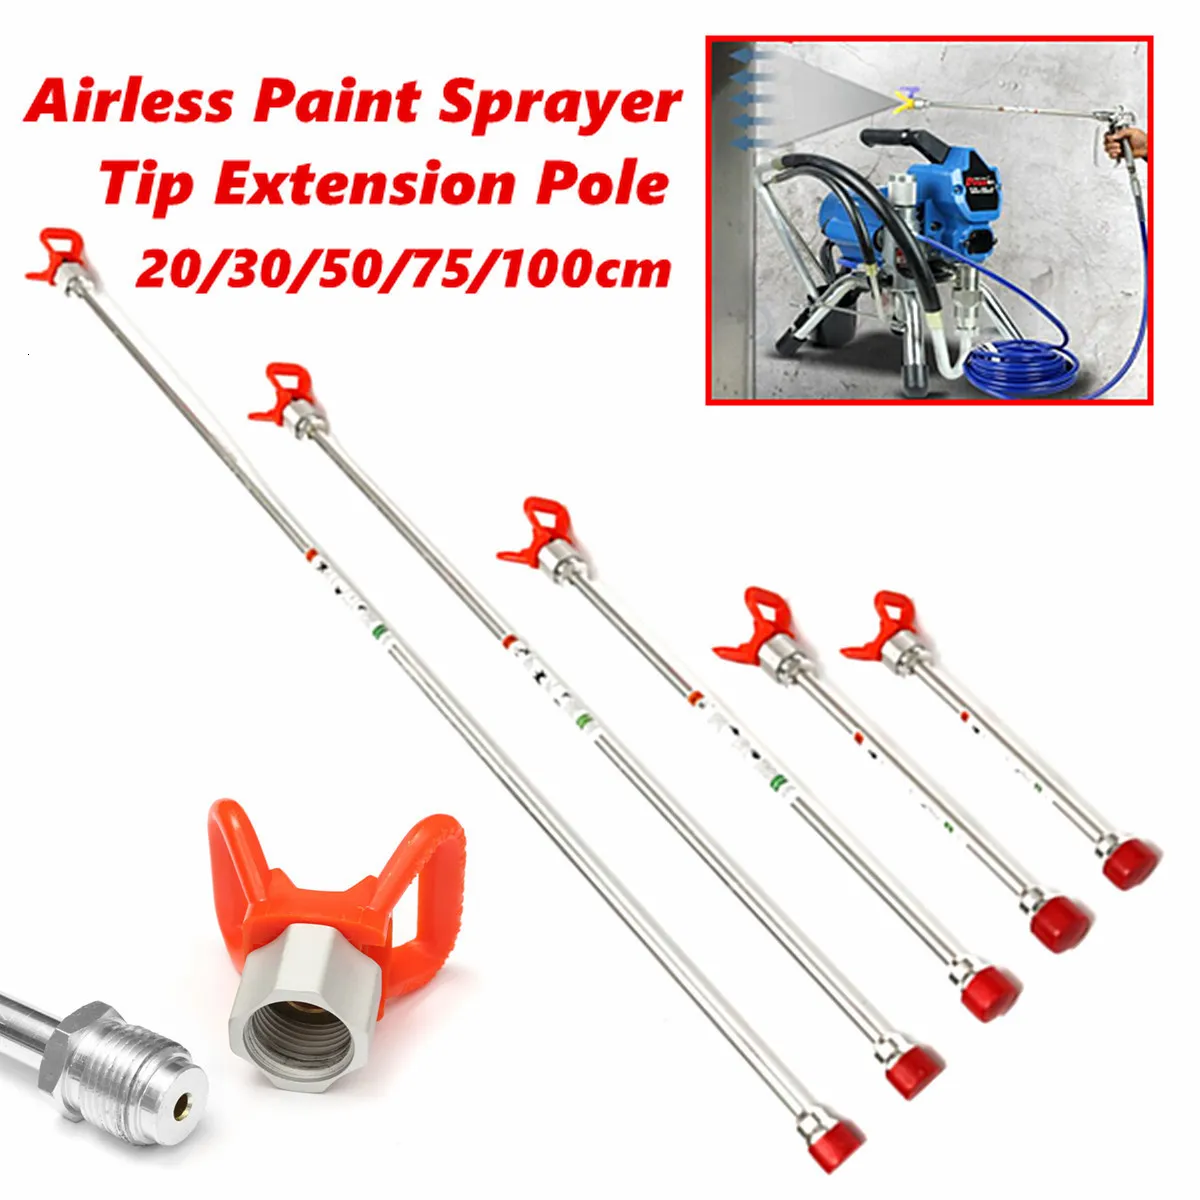 Spray Guns 20/30/50/75/100cm er Extension Rod Airless Paint Tip Pole for Titans Wagner ing Machine 221118